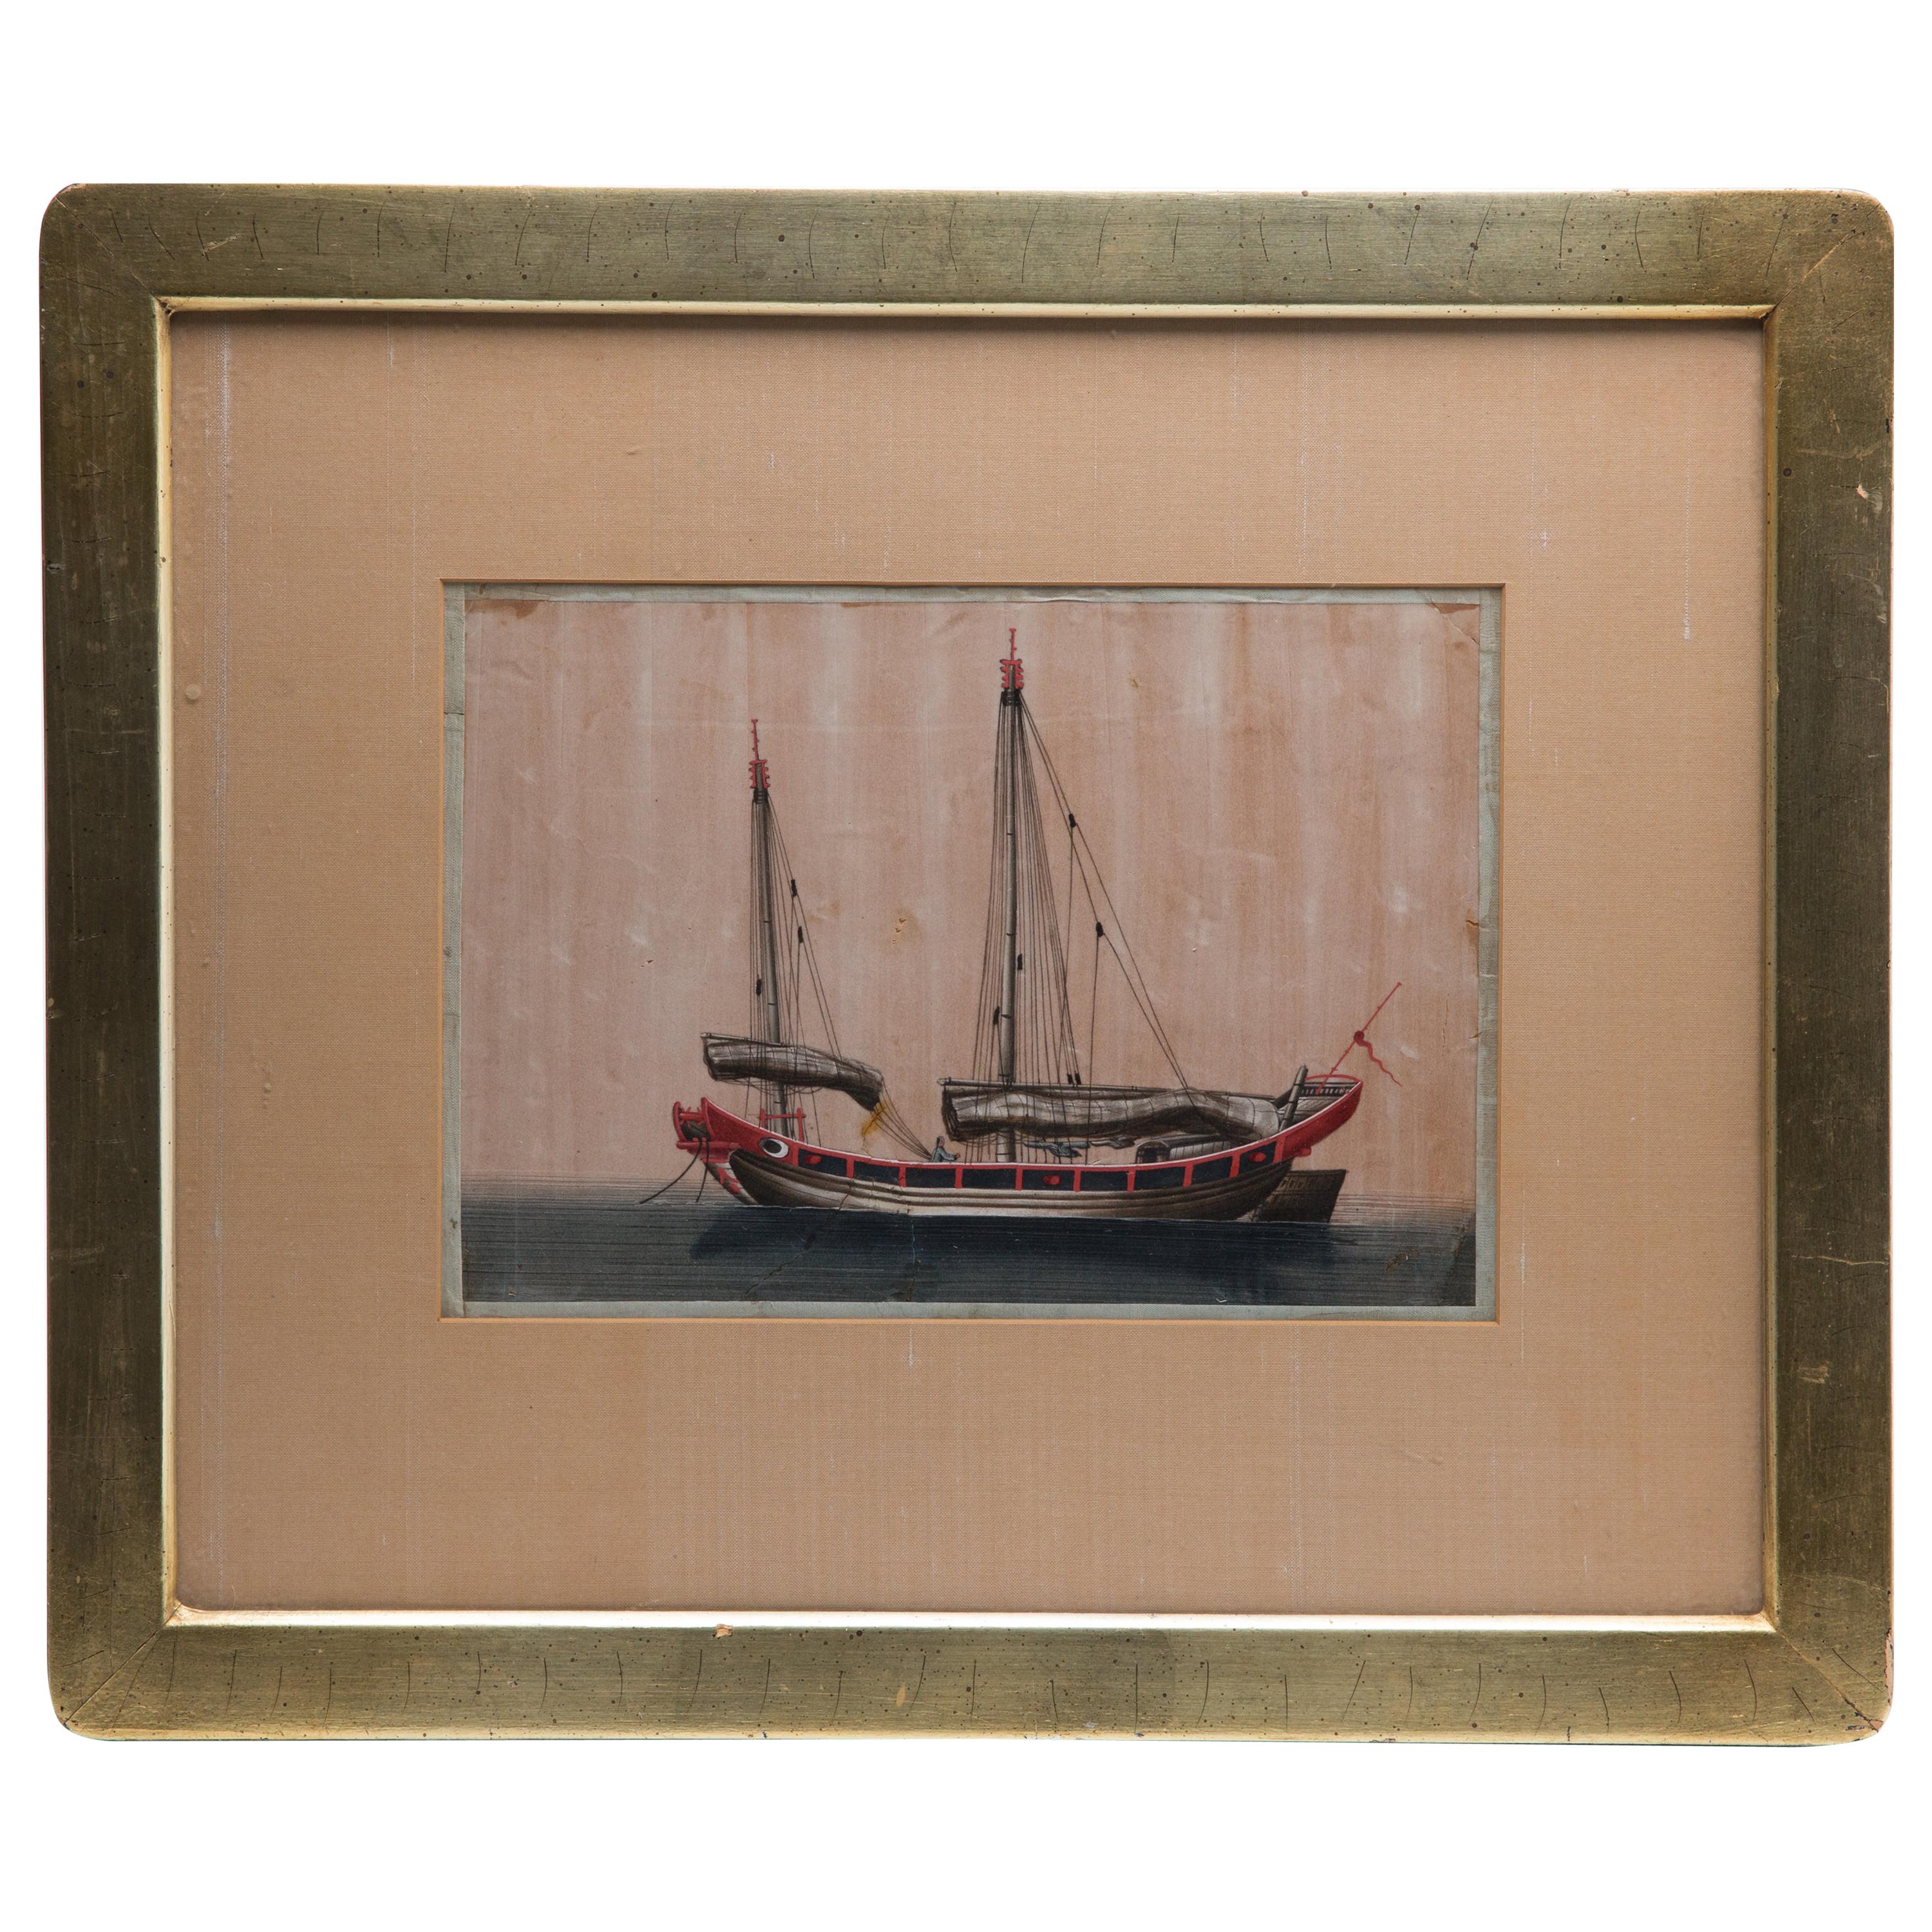 Chinese Export Antique Gouache Painting on Silk of a Merchant Sailing Ship